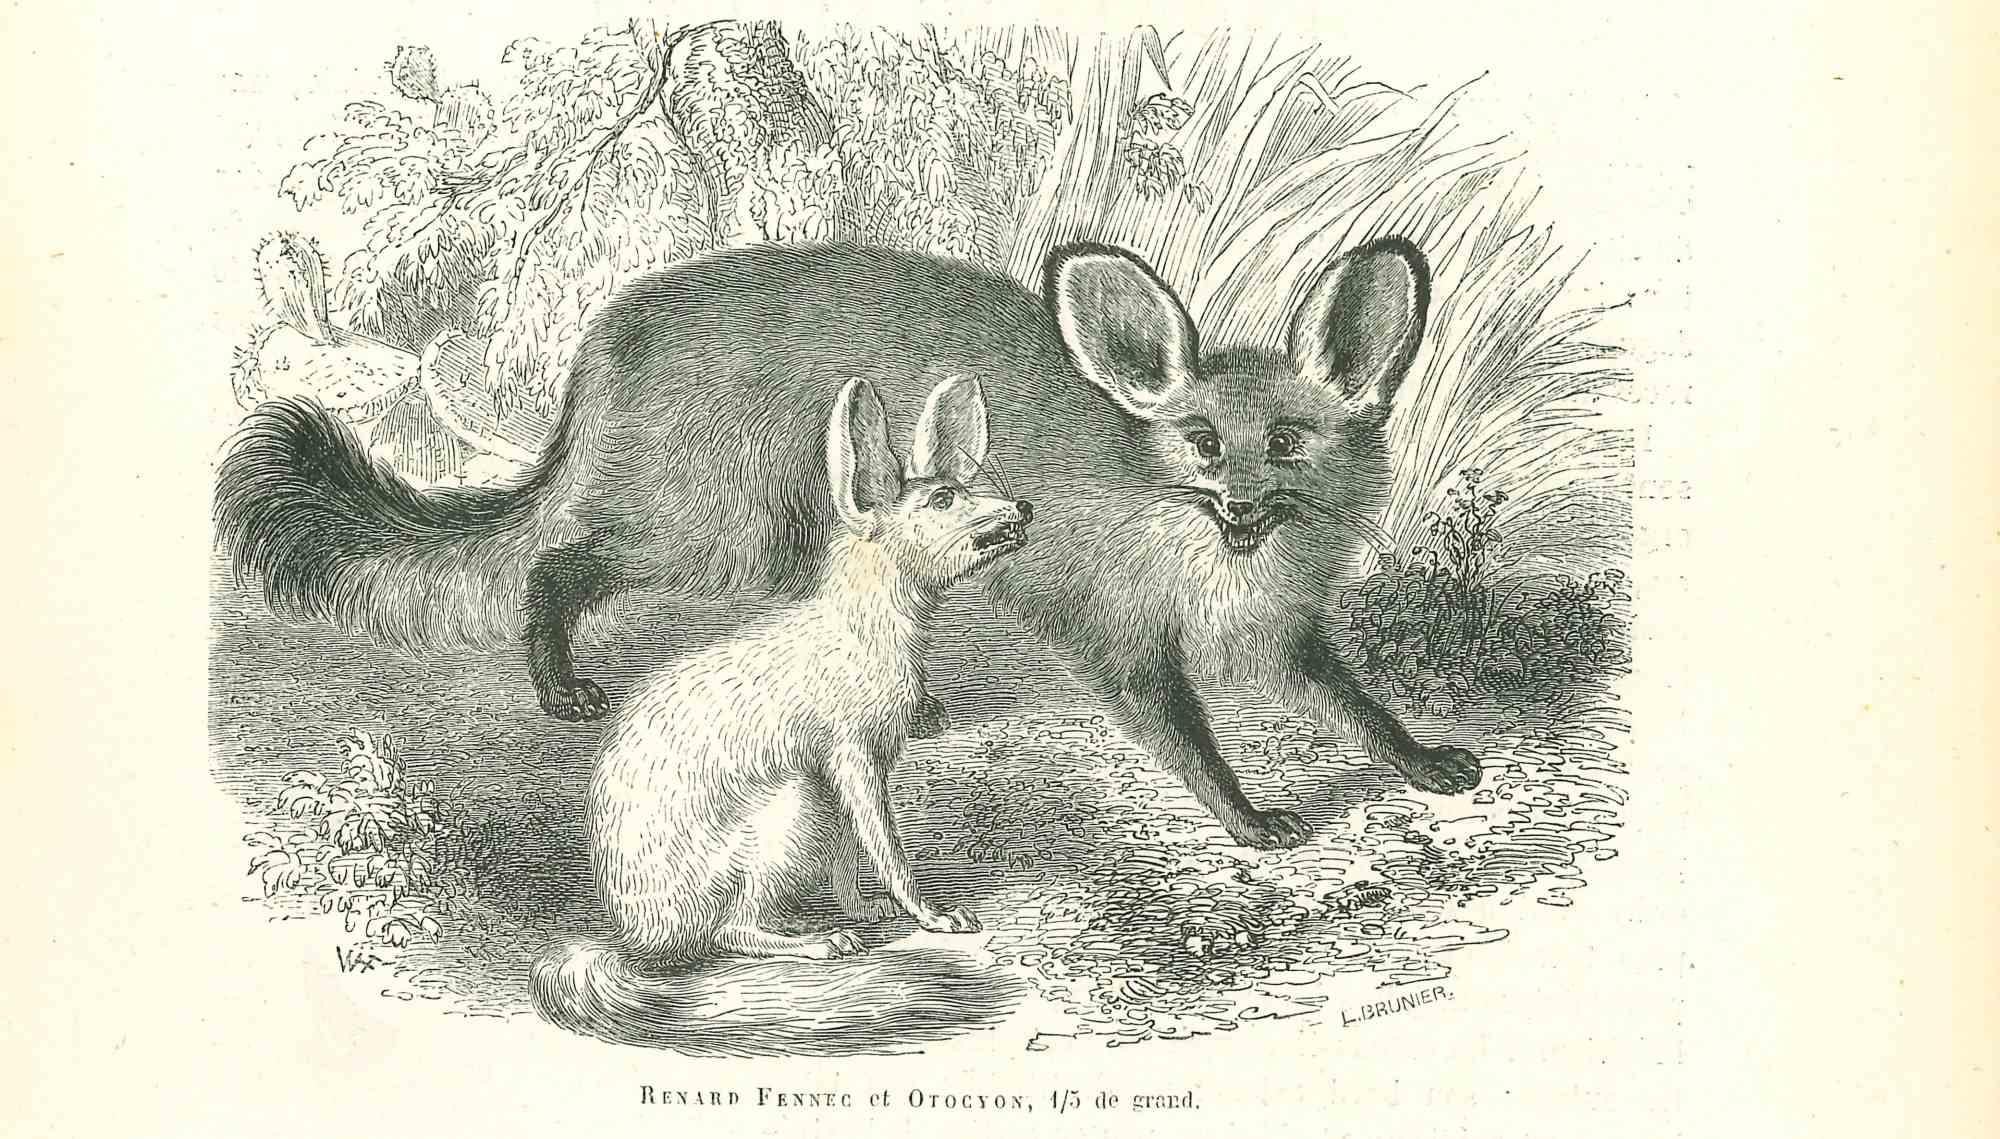 Renard Fennec is a lithograph on ivory-colored paper, realized by Paul Gervais (1816-1879). The artwork is from The Series of "Les Trois Règnes de la Nature", and was published in 1854.

Good conditions.

Titled on the lower. With the notes on the